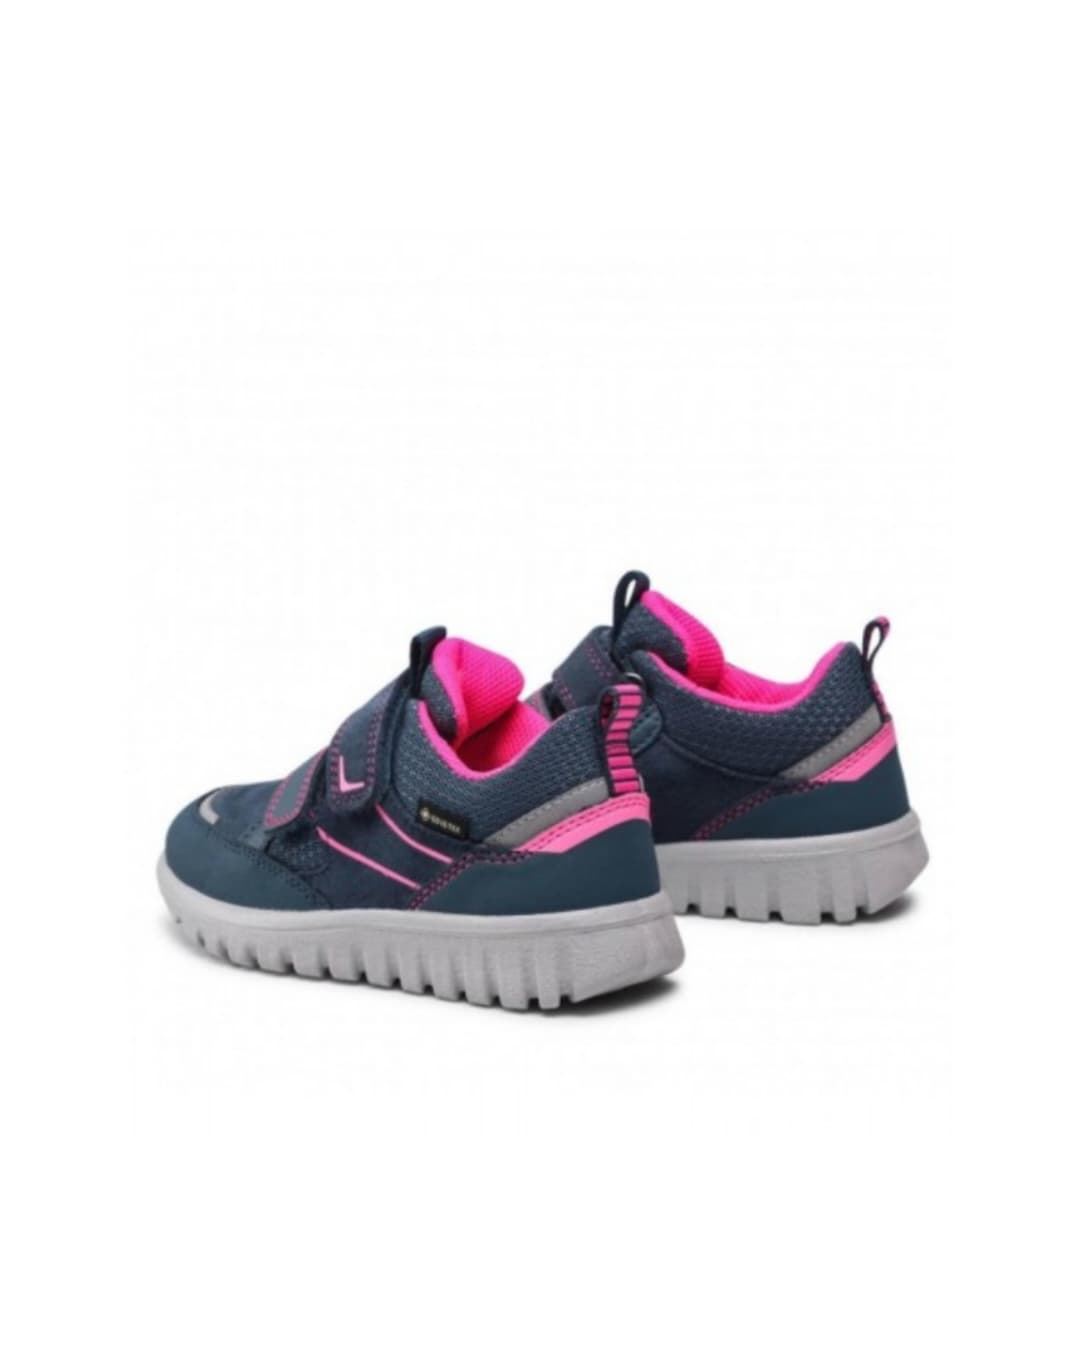 Superfit Girl's Gore-tex Shoes Blue and Pink - Image 2